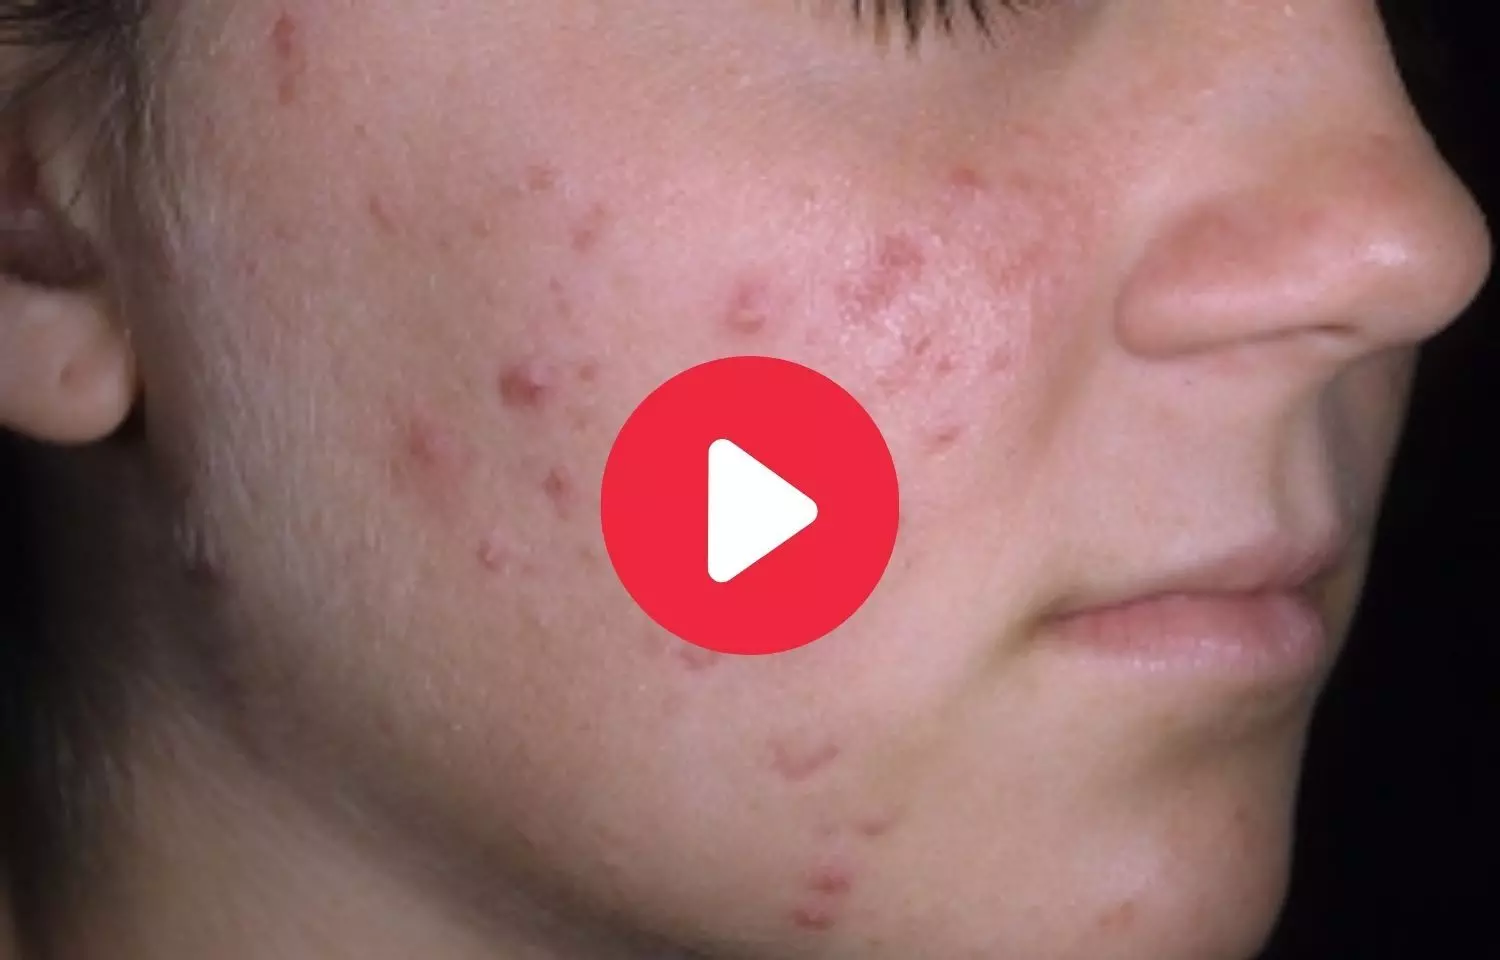 Teenage Acne: Cause, Symptoms, and Treatment